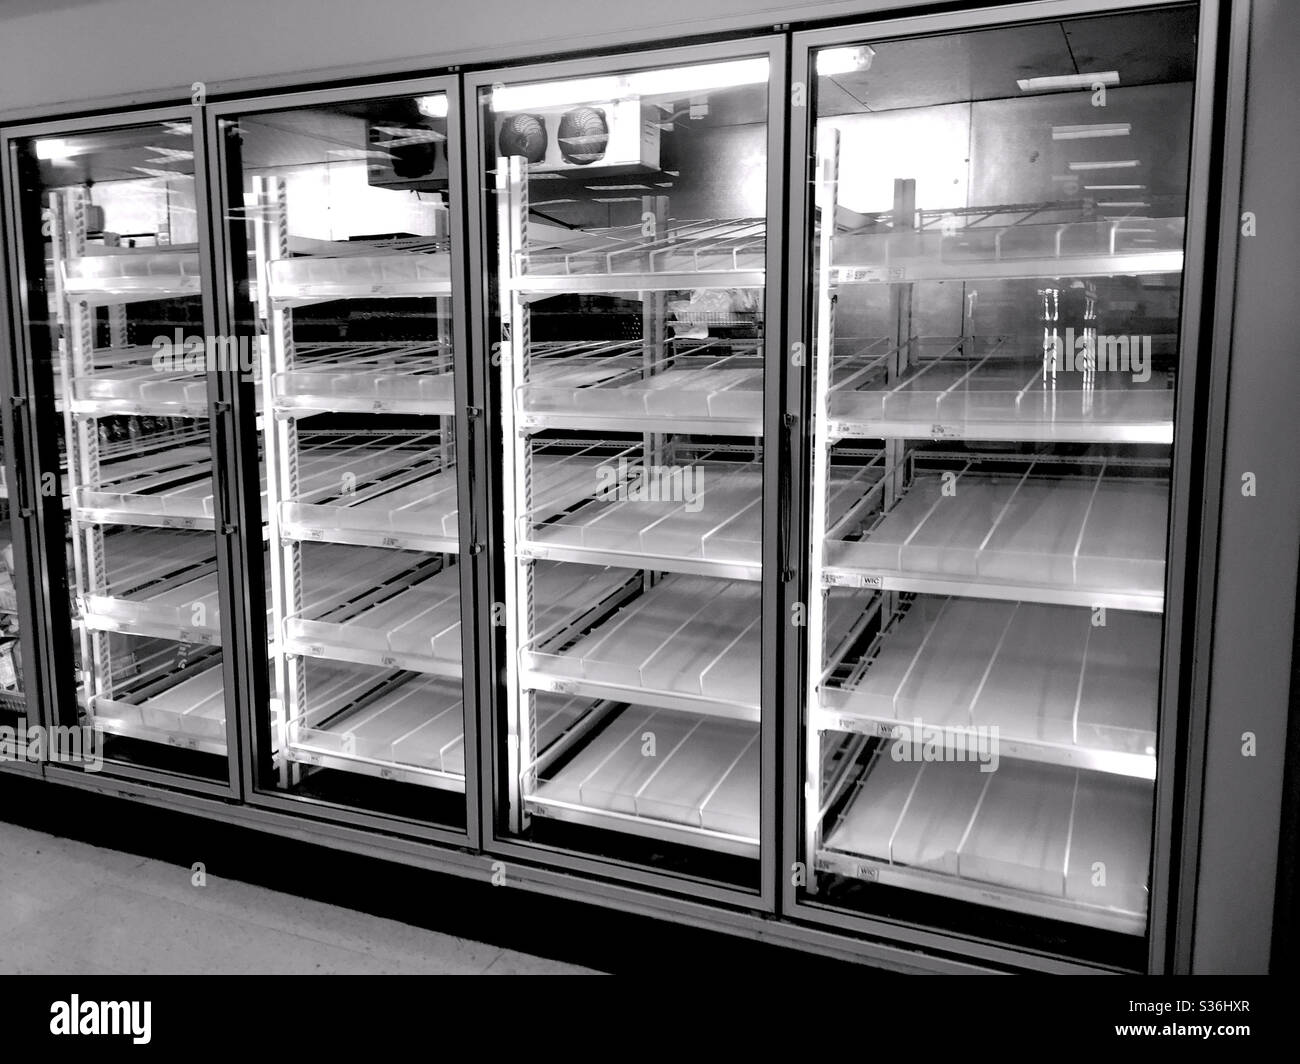 Empty refrigerator shelves at grocery store Stock Photo